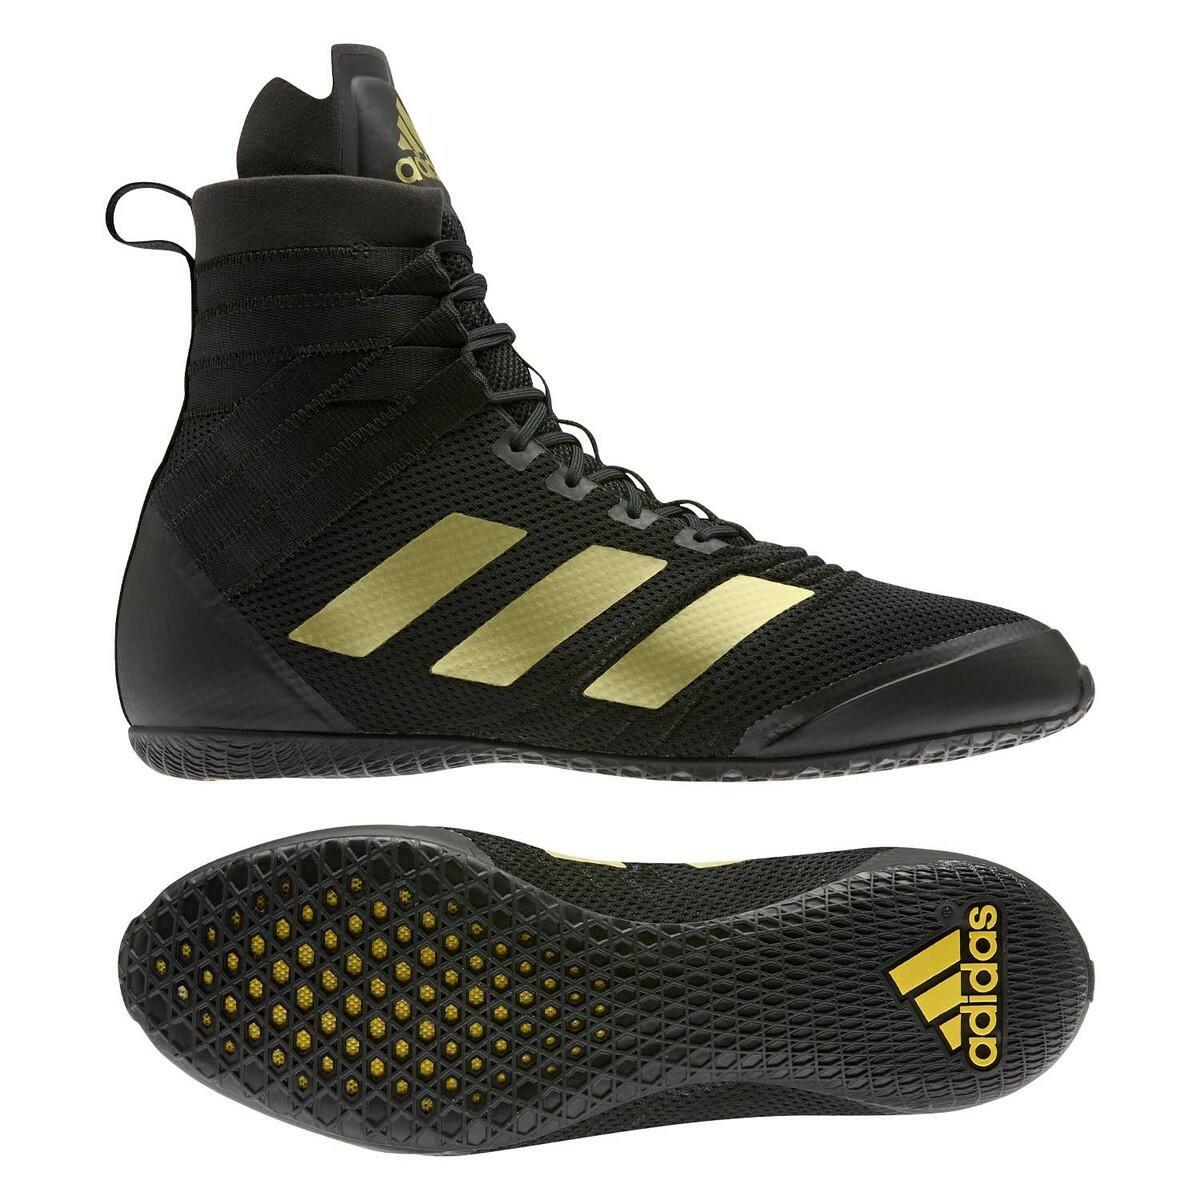 Black-Gold Adidas Speedex 18 Boxing from Made4Fighters